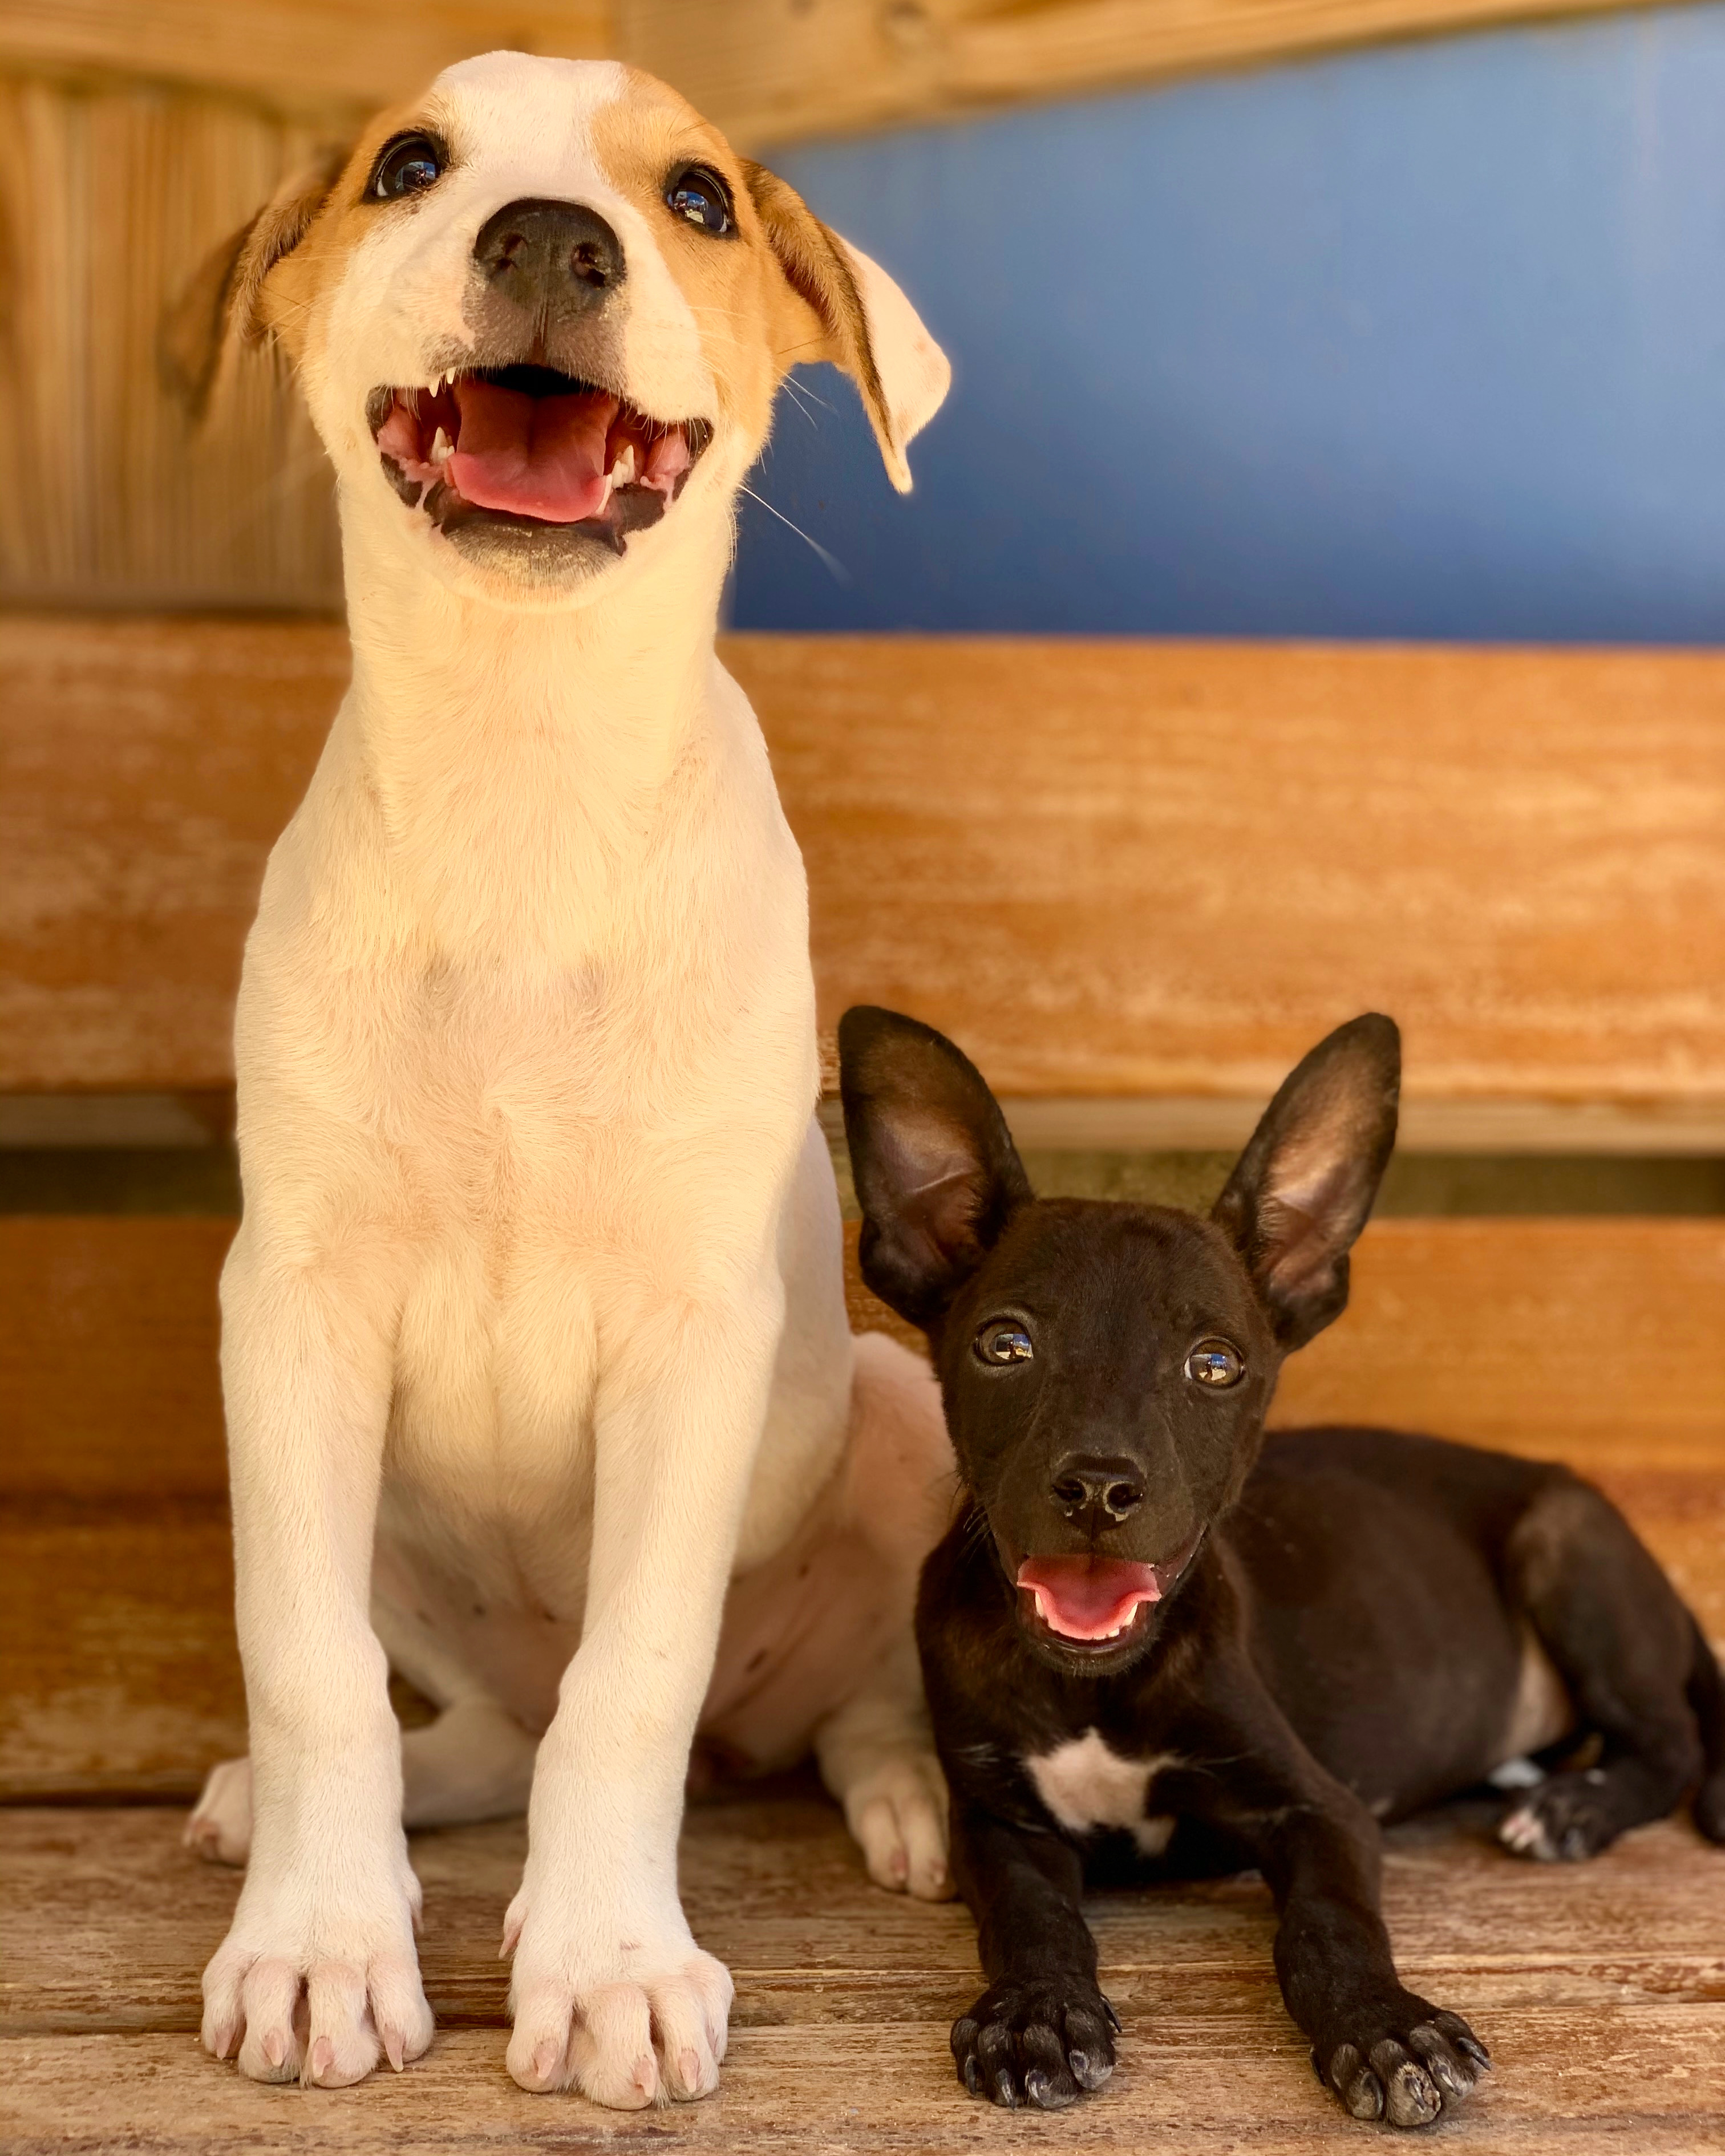 A white and brown puppy sits with a smaller black puppy